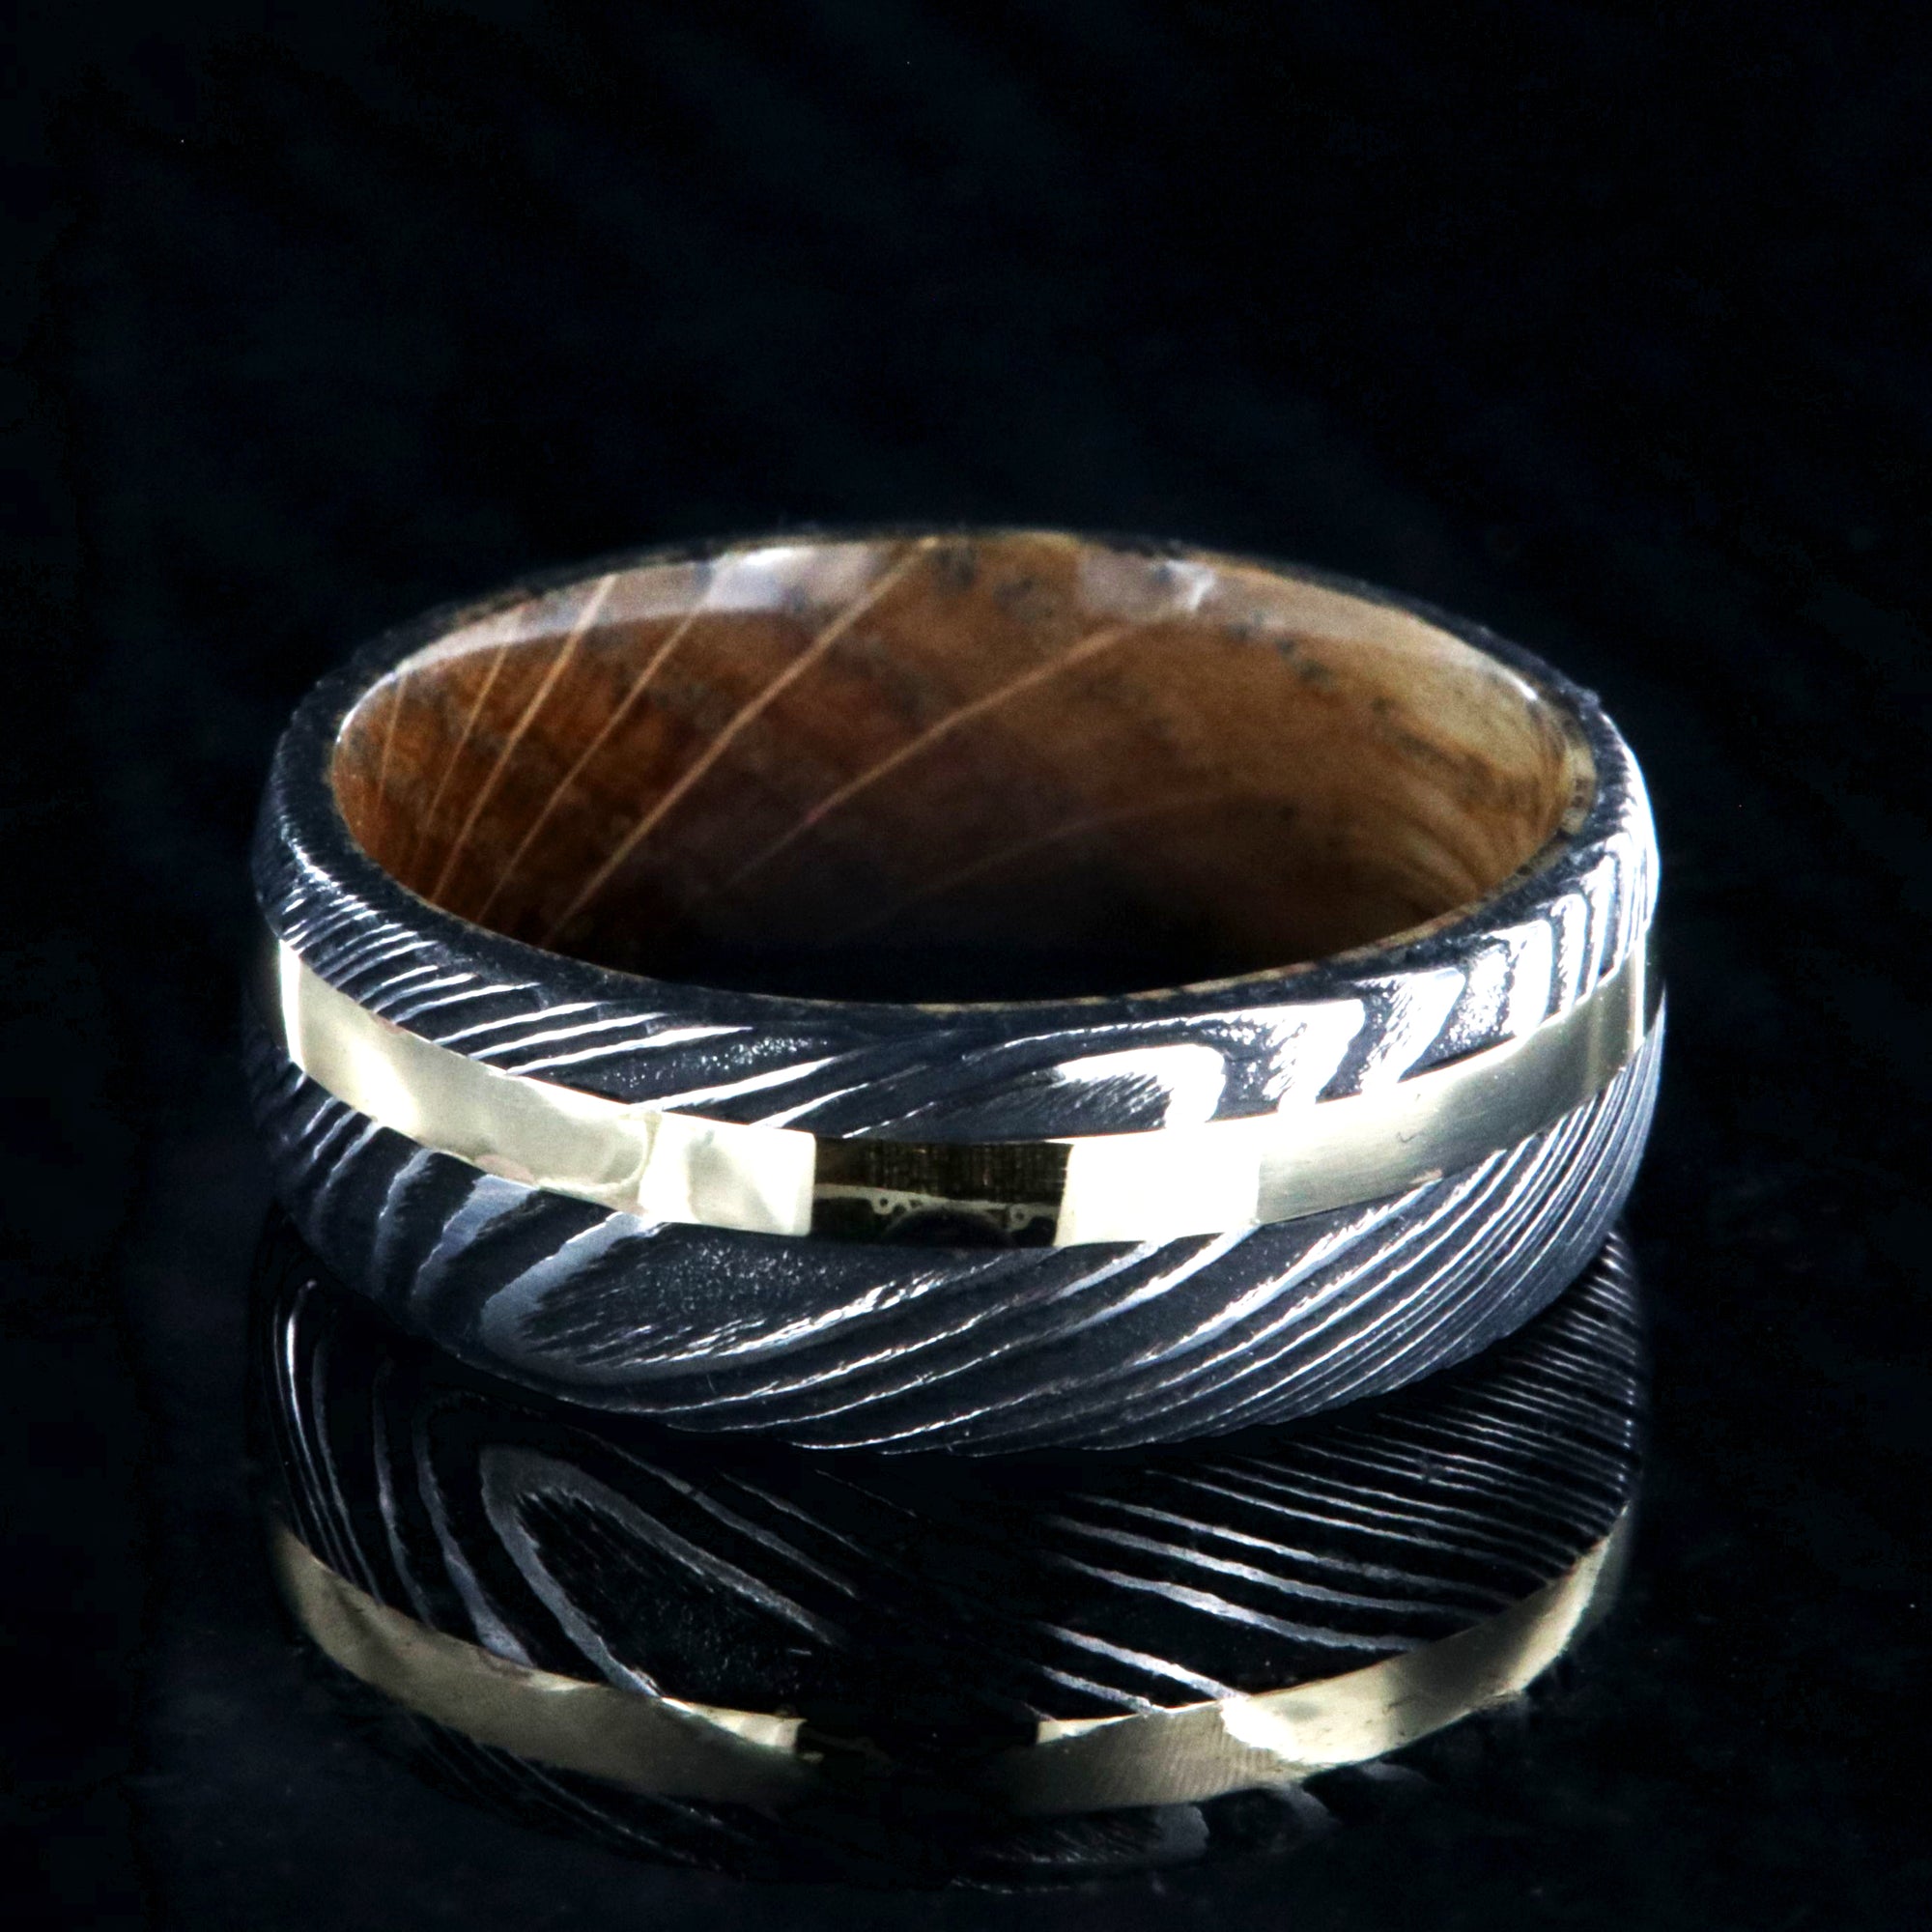 8mm wide black Damascus steel wedding ring with rounded profile, 2mm wide yellow gold inlay and a Jack Daniel's whiskey barrel sleeve